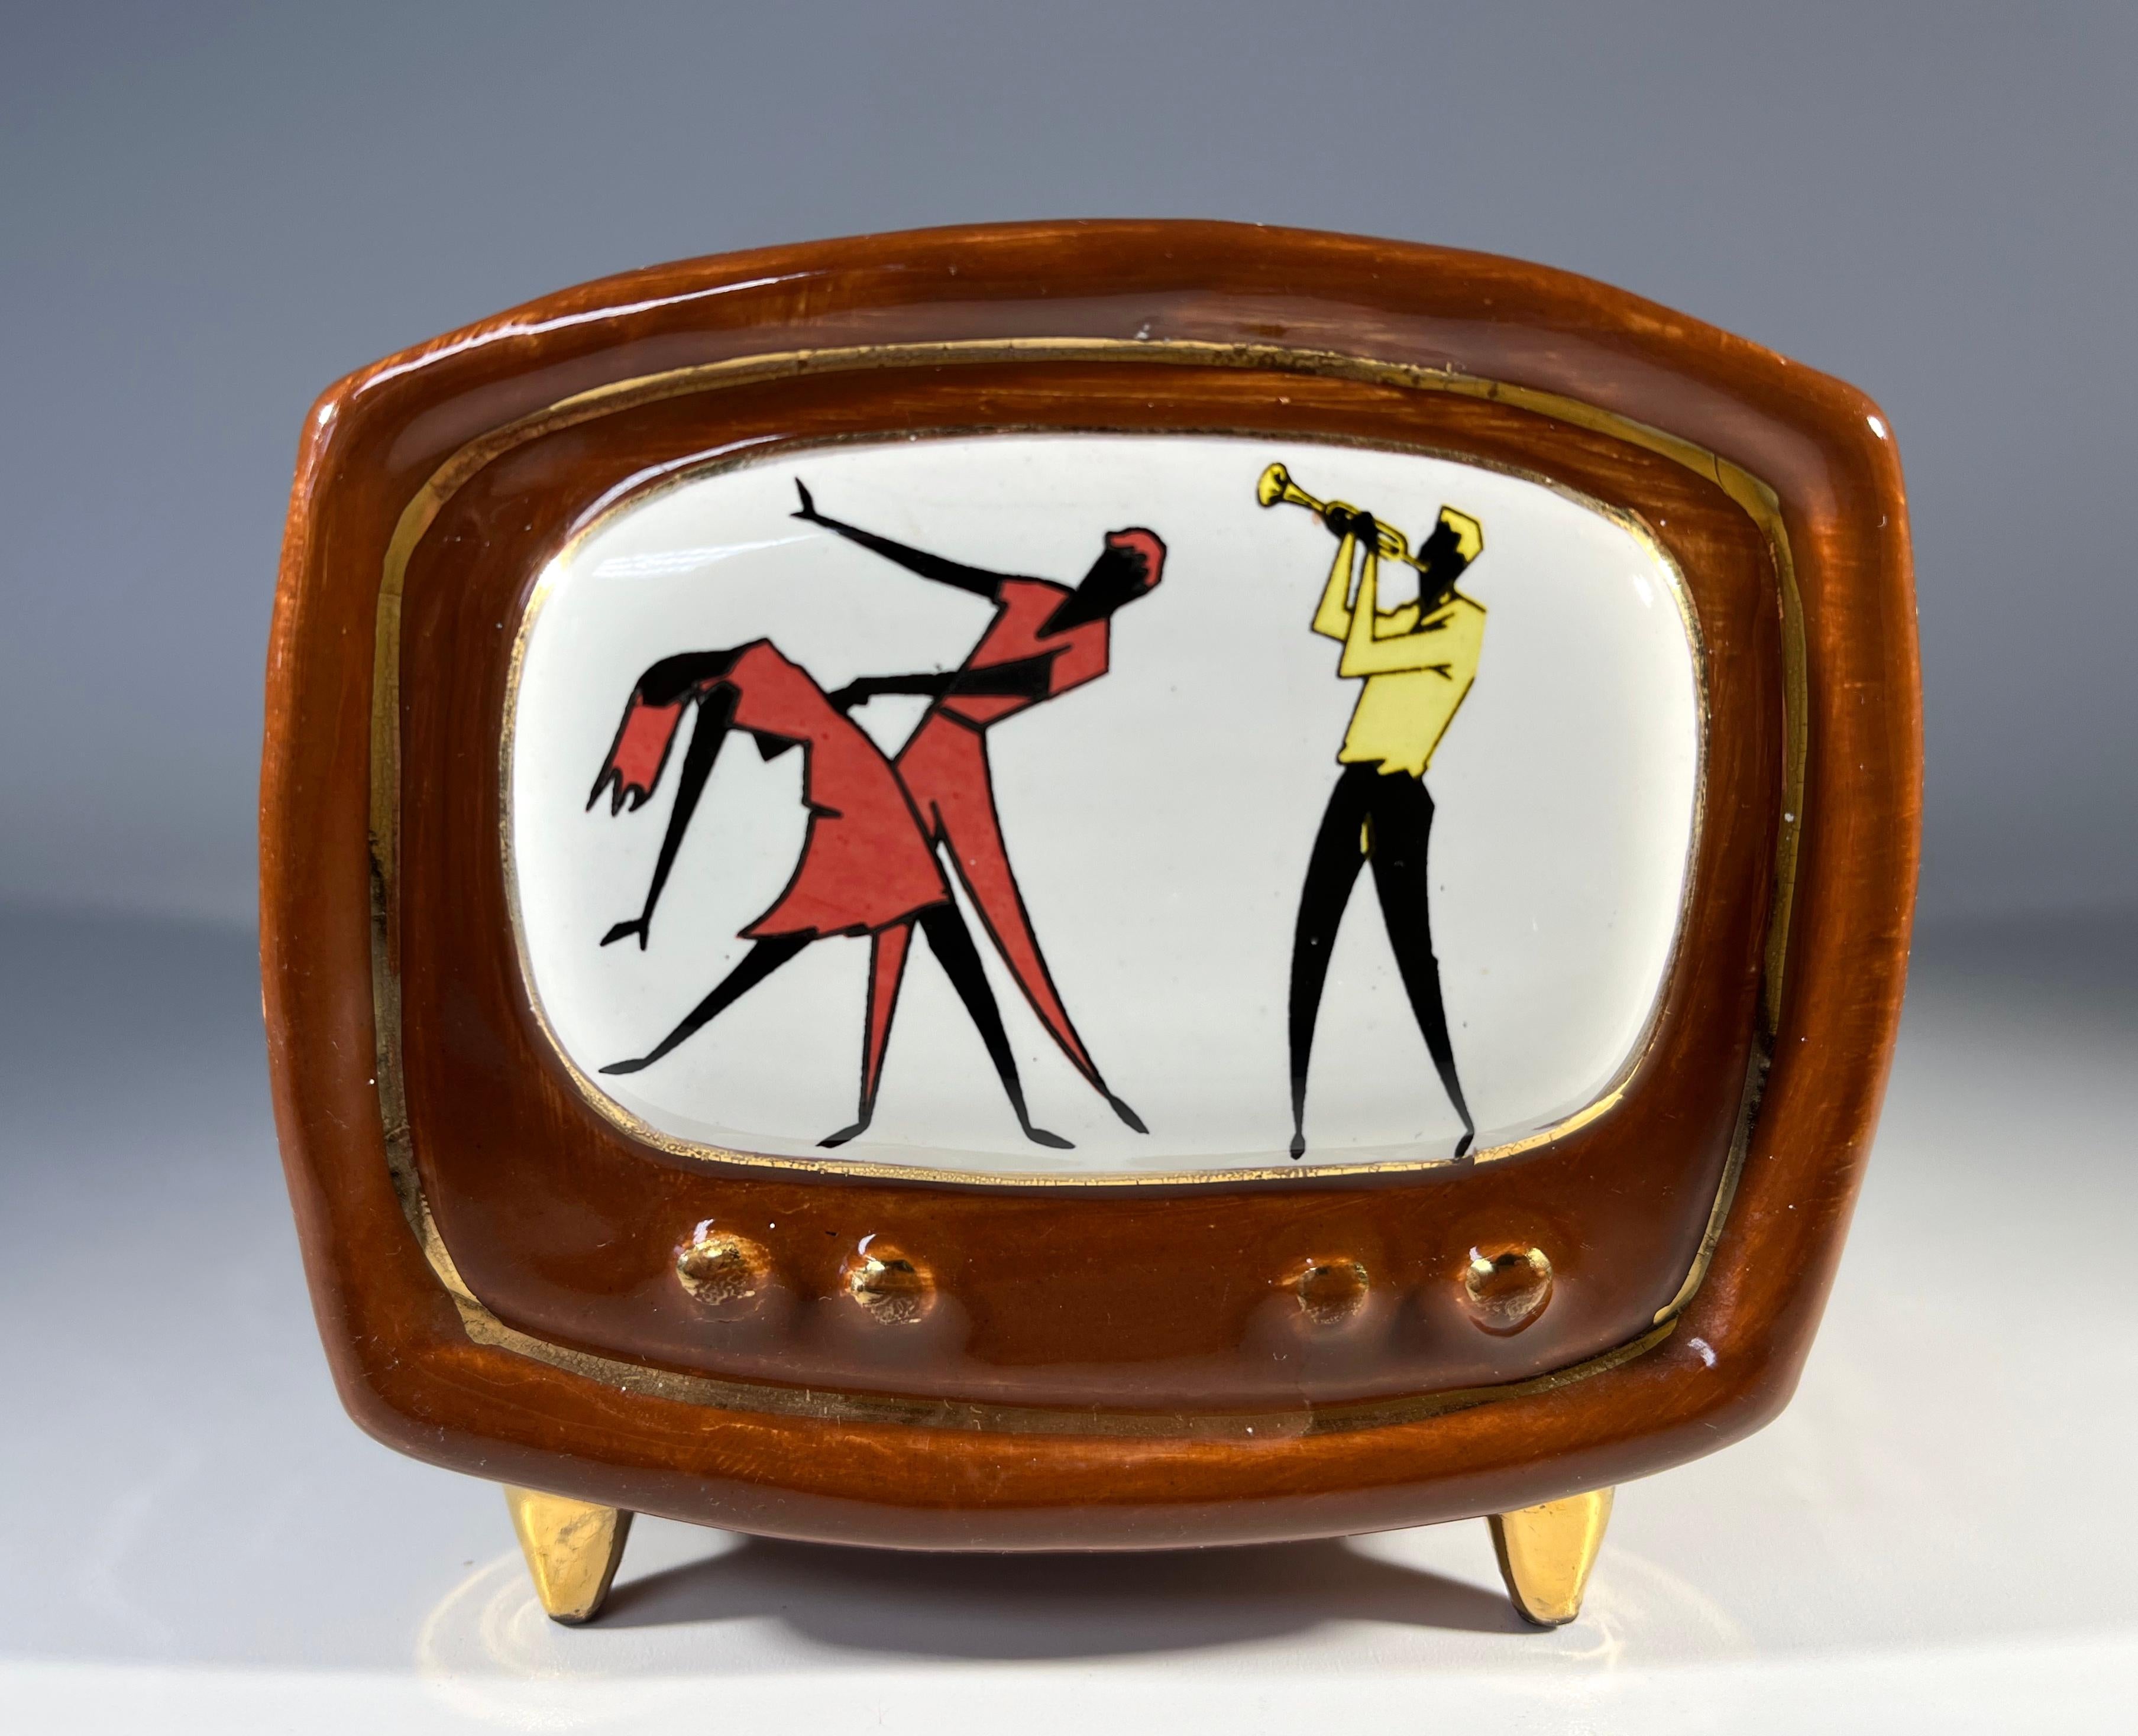 From another era, retro ashtray shaped as a television
On screen are two animated dancers accompanied by a jazz musician
Likely created for Raymor, who specialised in mid-century decorative arts 
A superbly retro piece
Circa 1960's
Signed Italy with